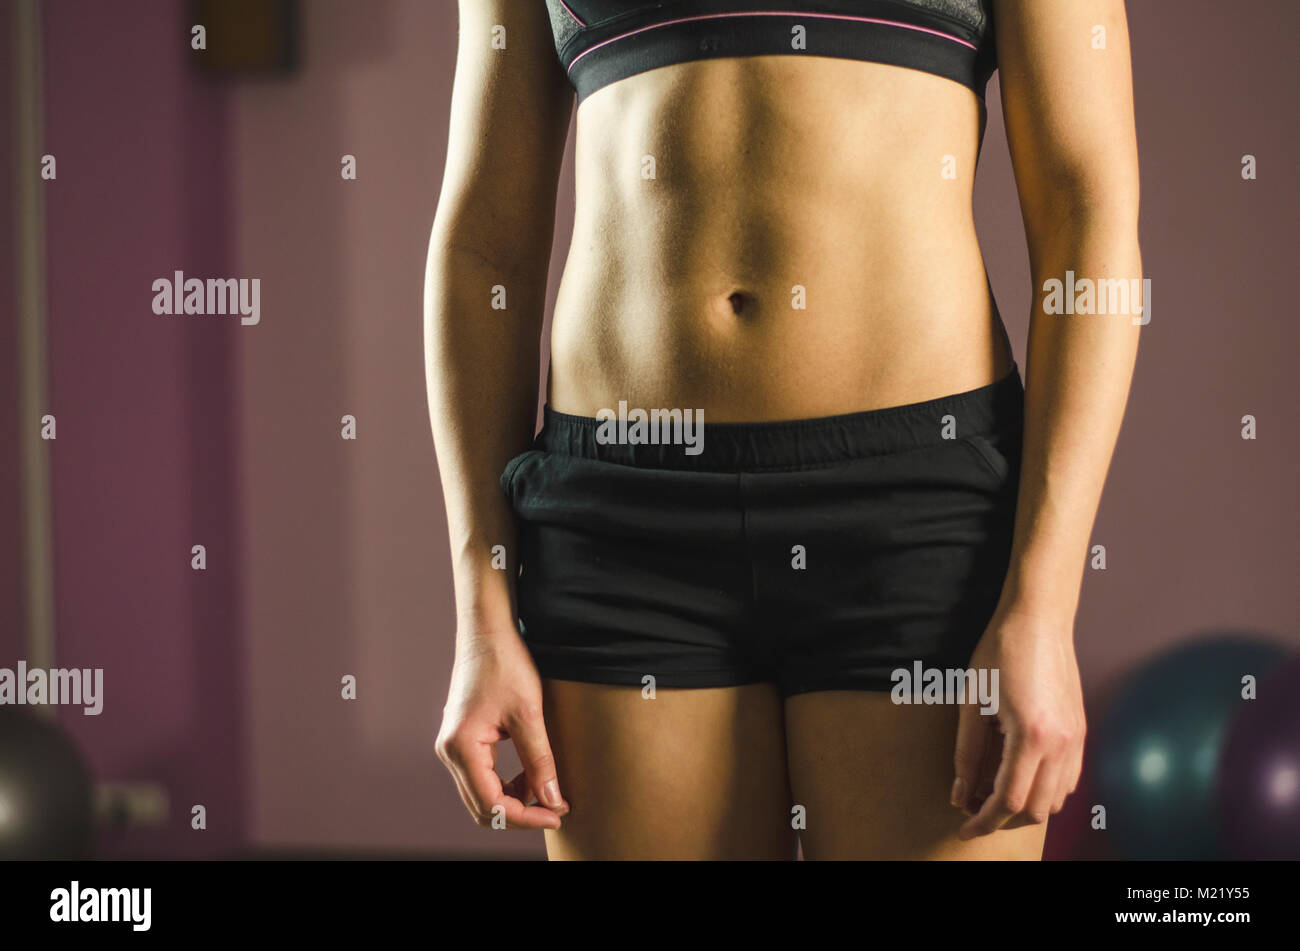 20,405 Woman Flat Stomach Images, Stock Photos, 3D objects, & Vectors